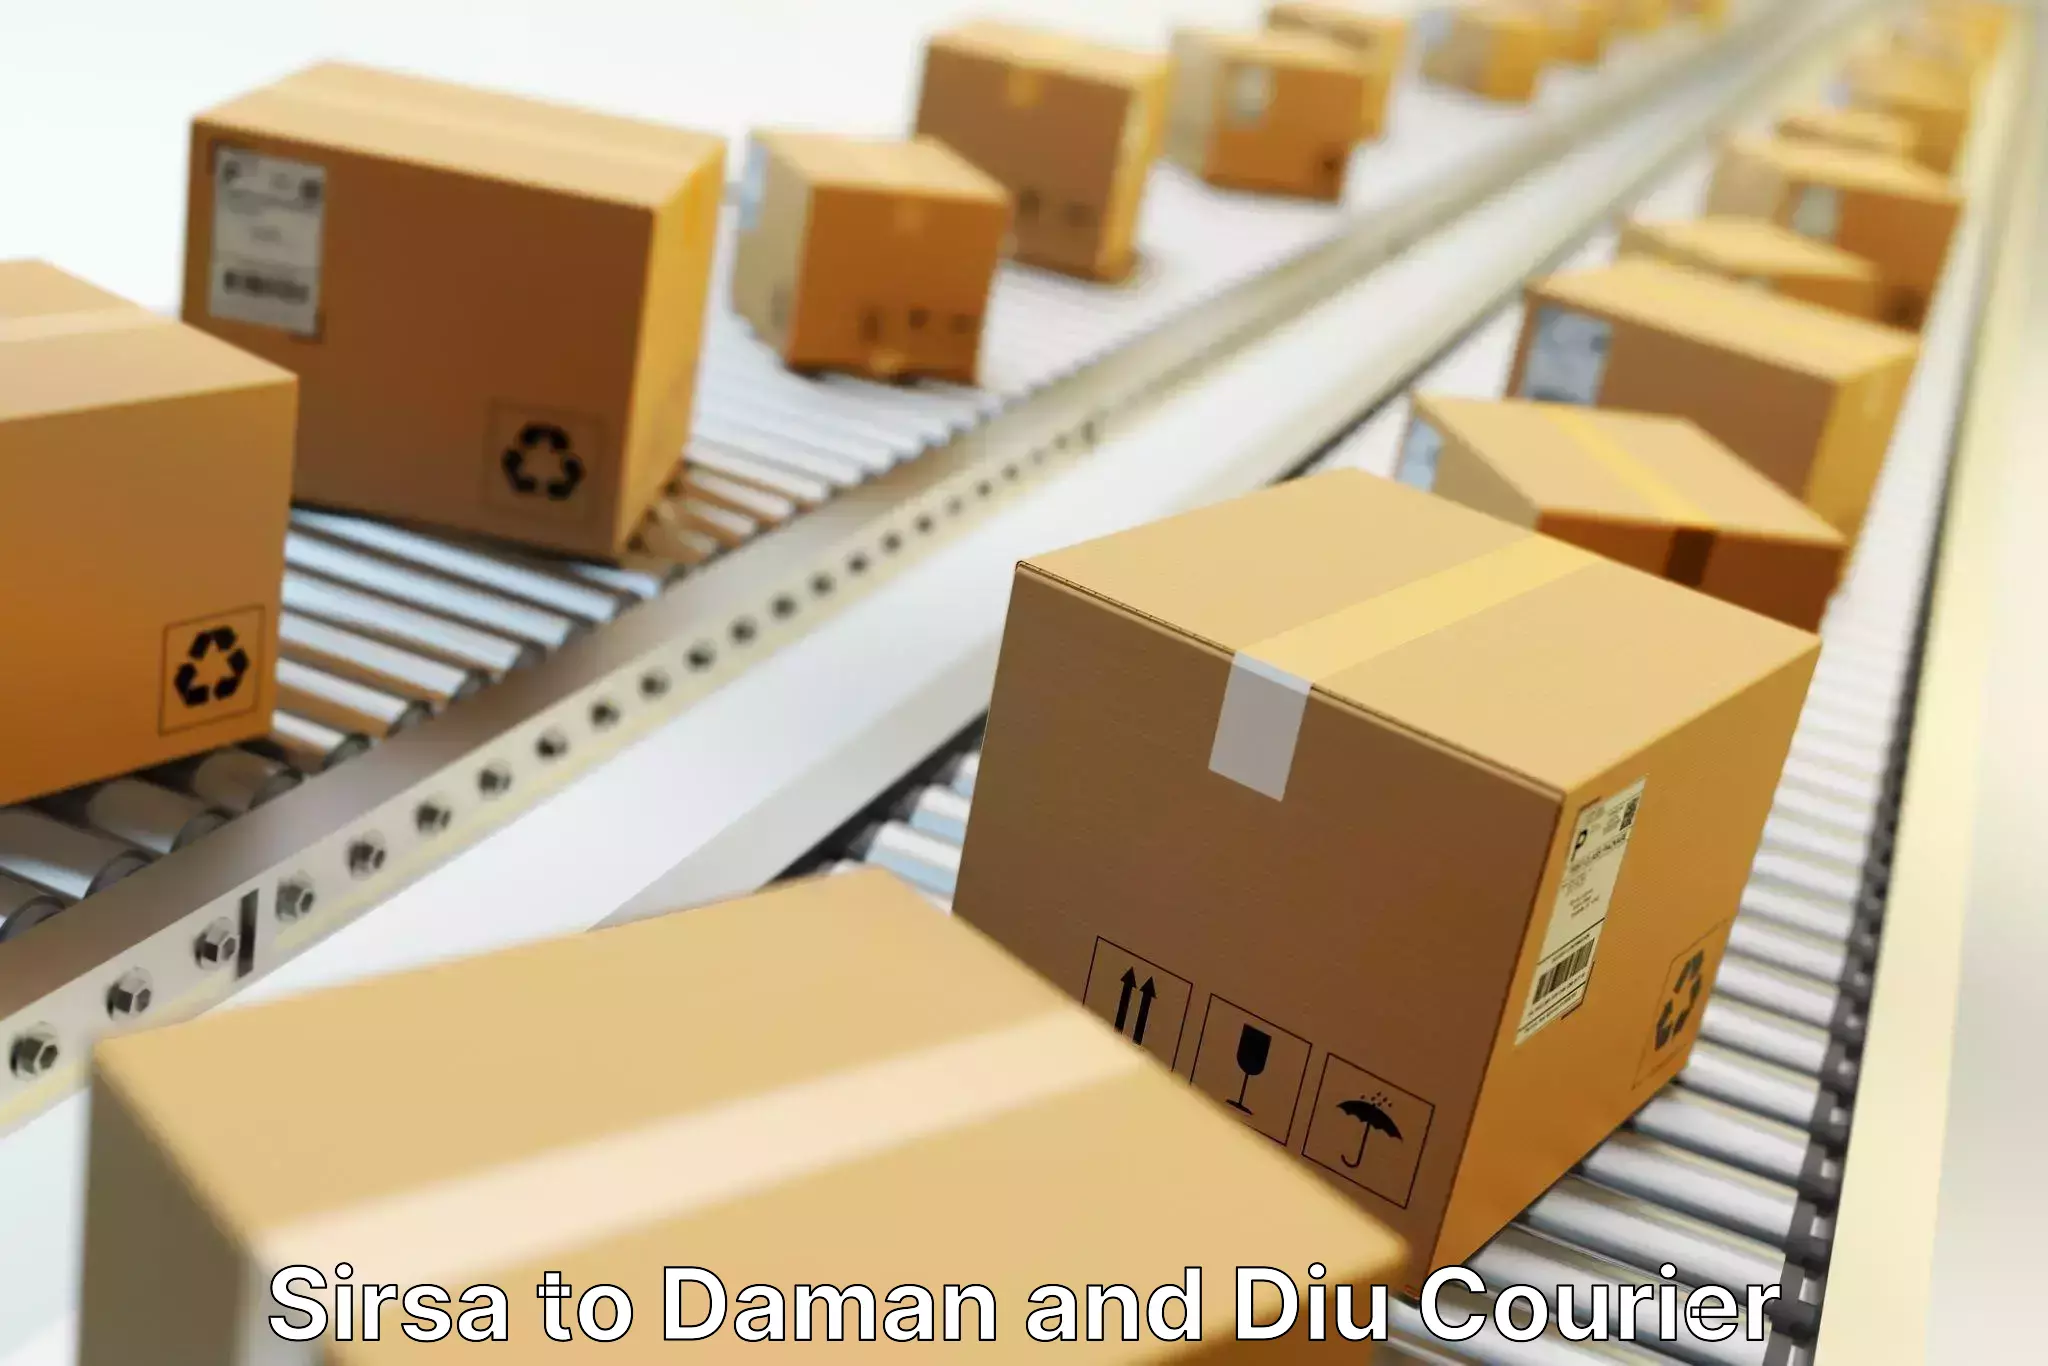 Flexible parcel services Sirsa to Daman and Diu